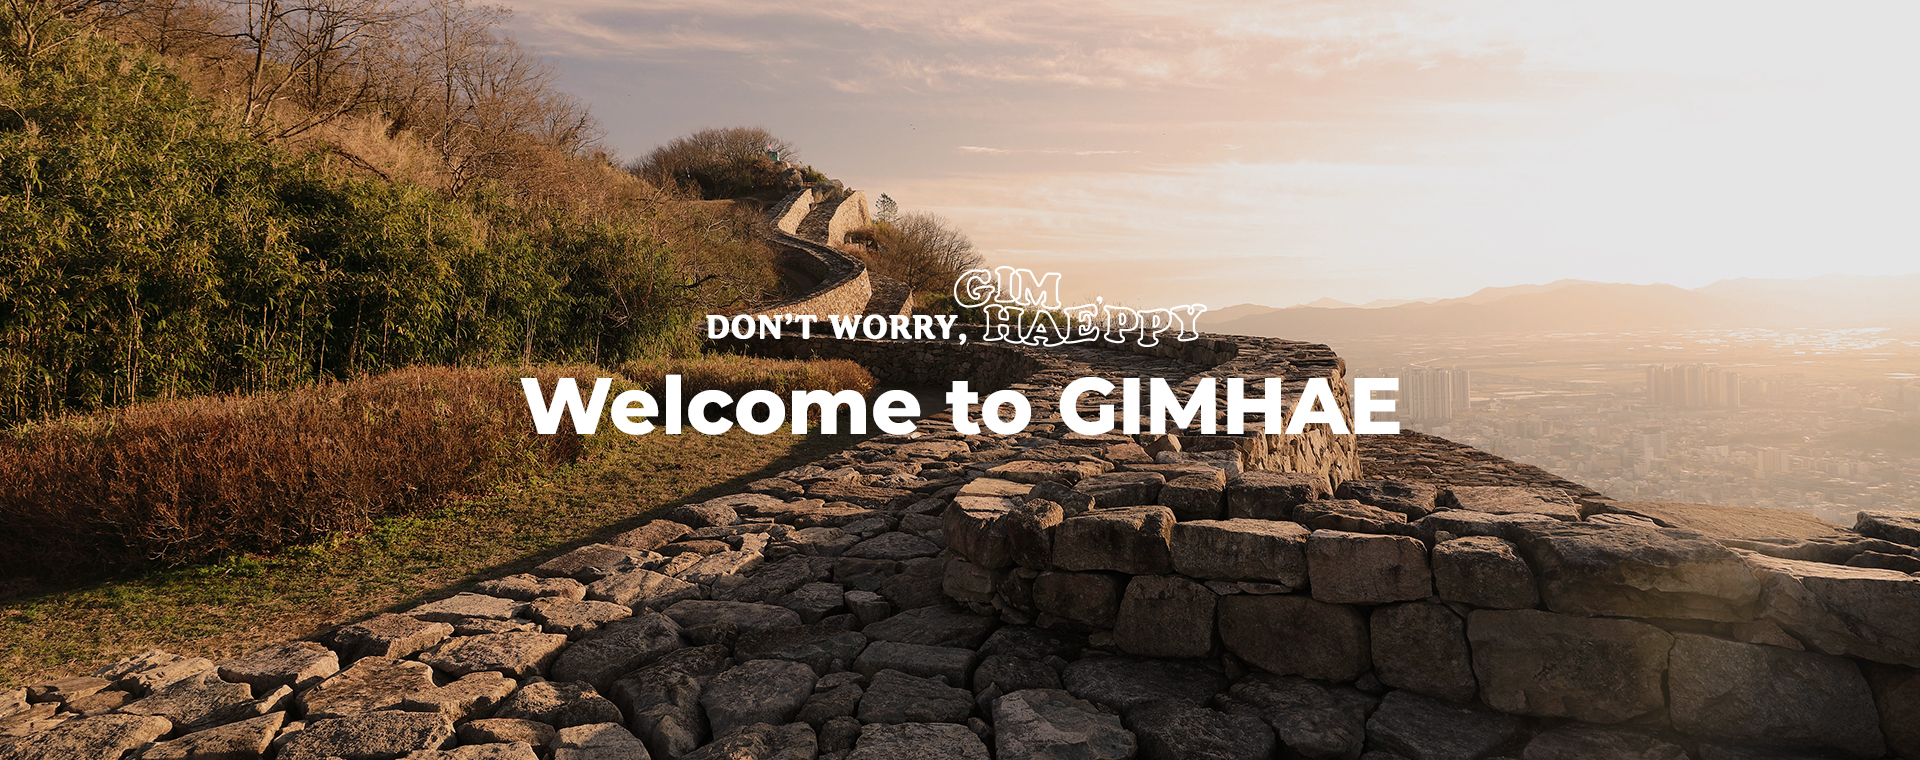 DON'T WORRY, GIMHAE'PPY Welcome to GIMGHAE